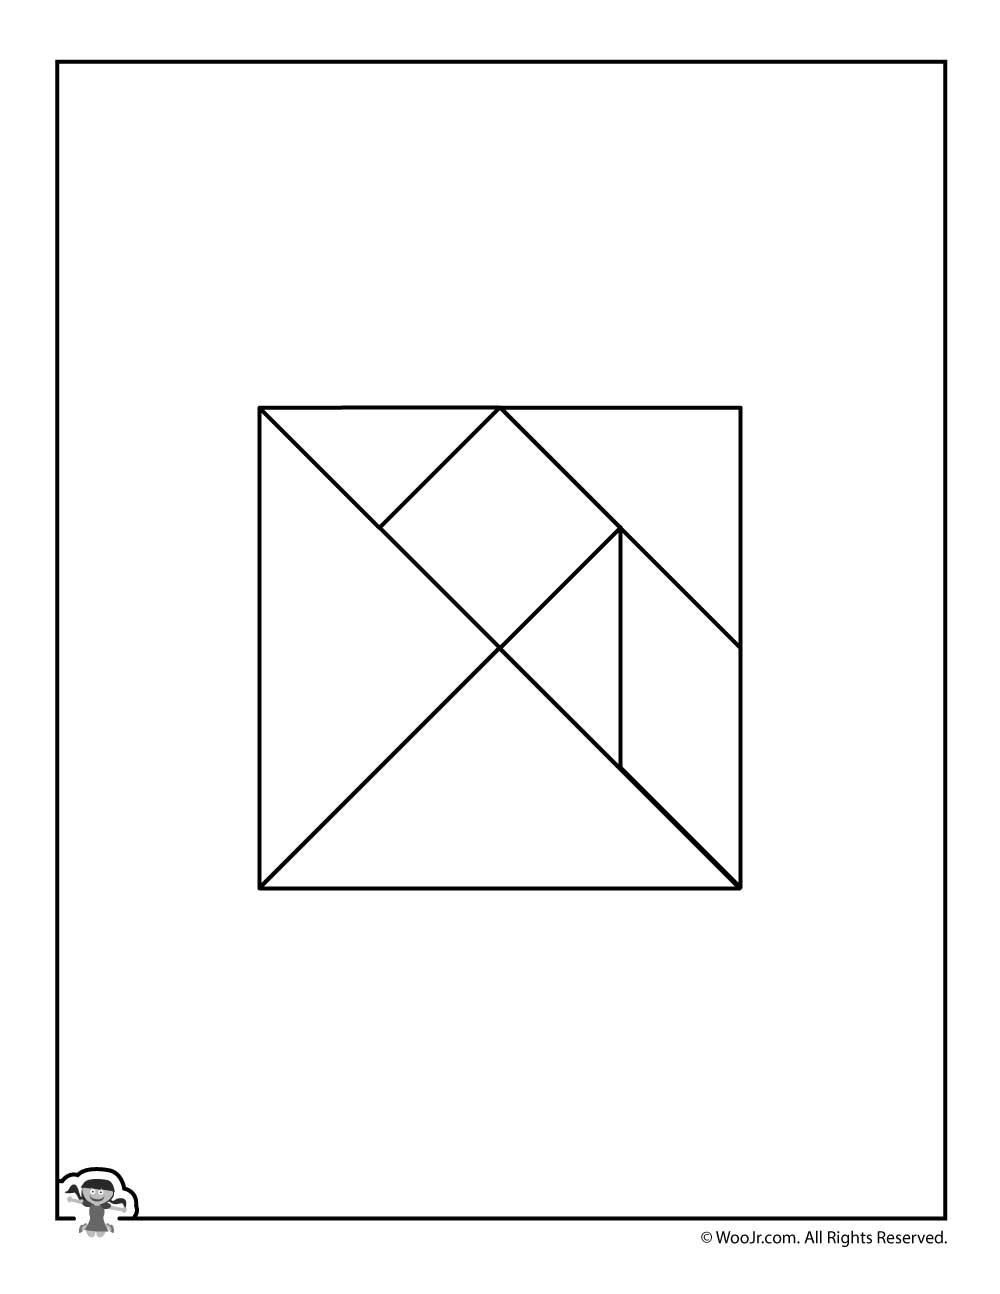 Color Your Own Printable Tangram Puzzle Pieces | Woo! Jr. Kids - Printable Tangram Puzzle Pieces